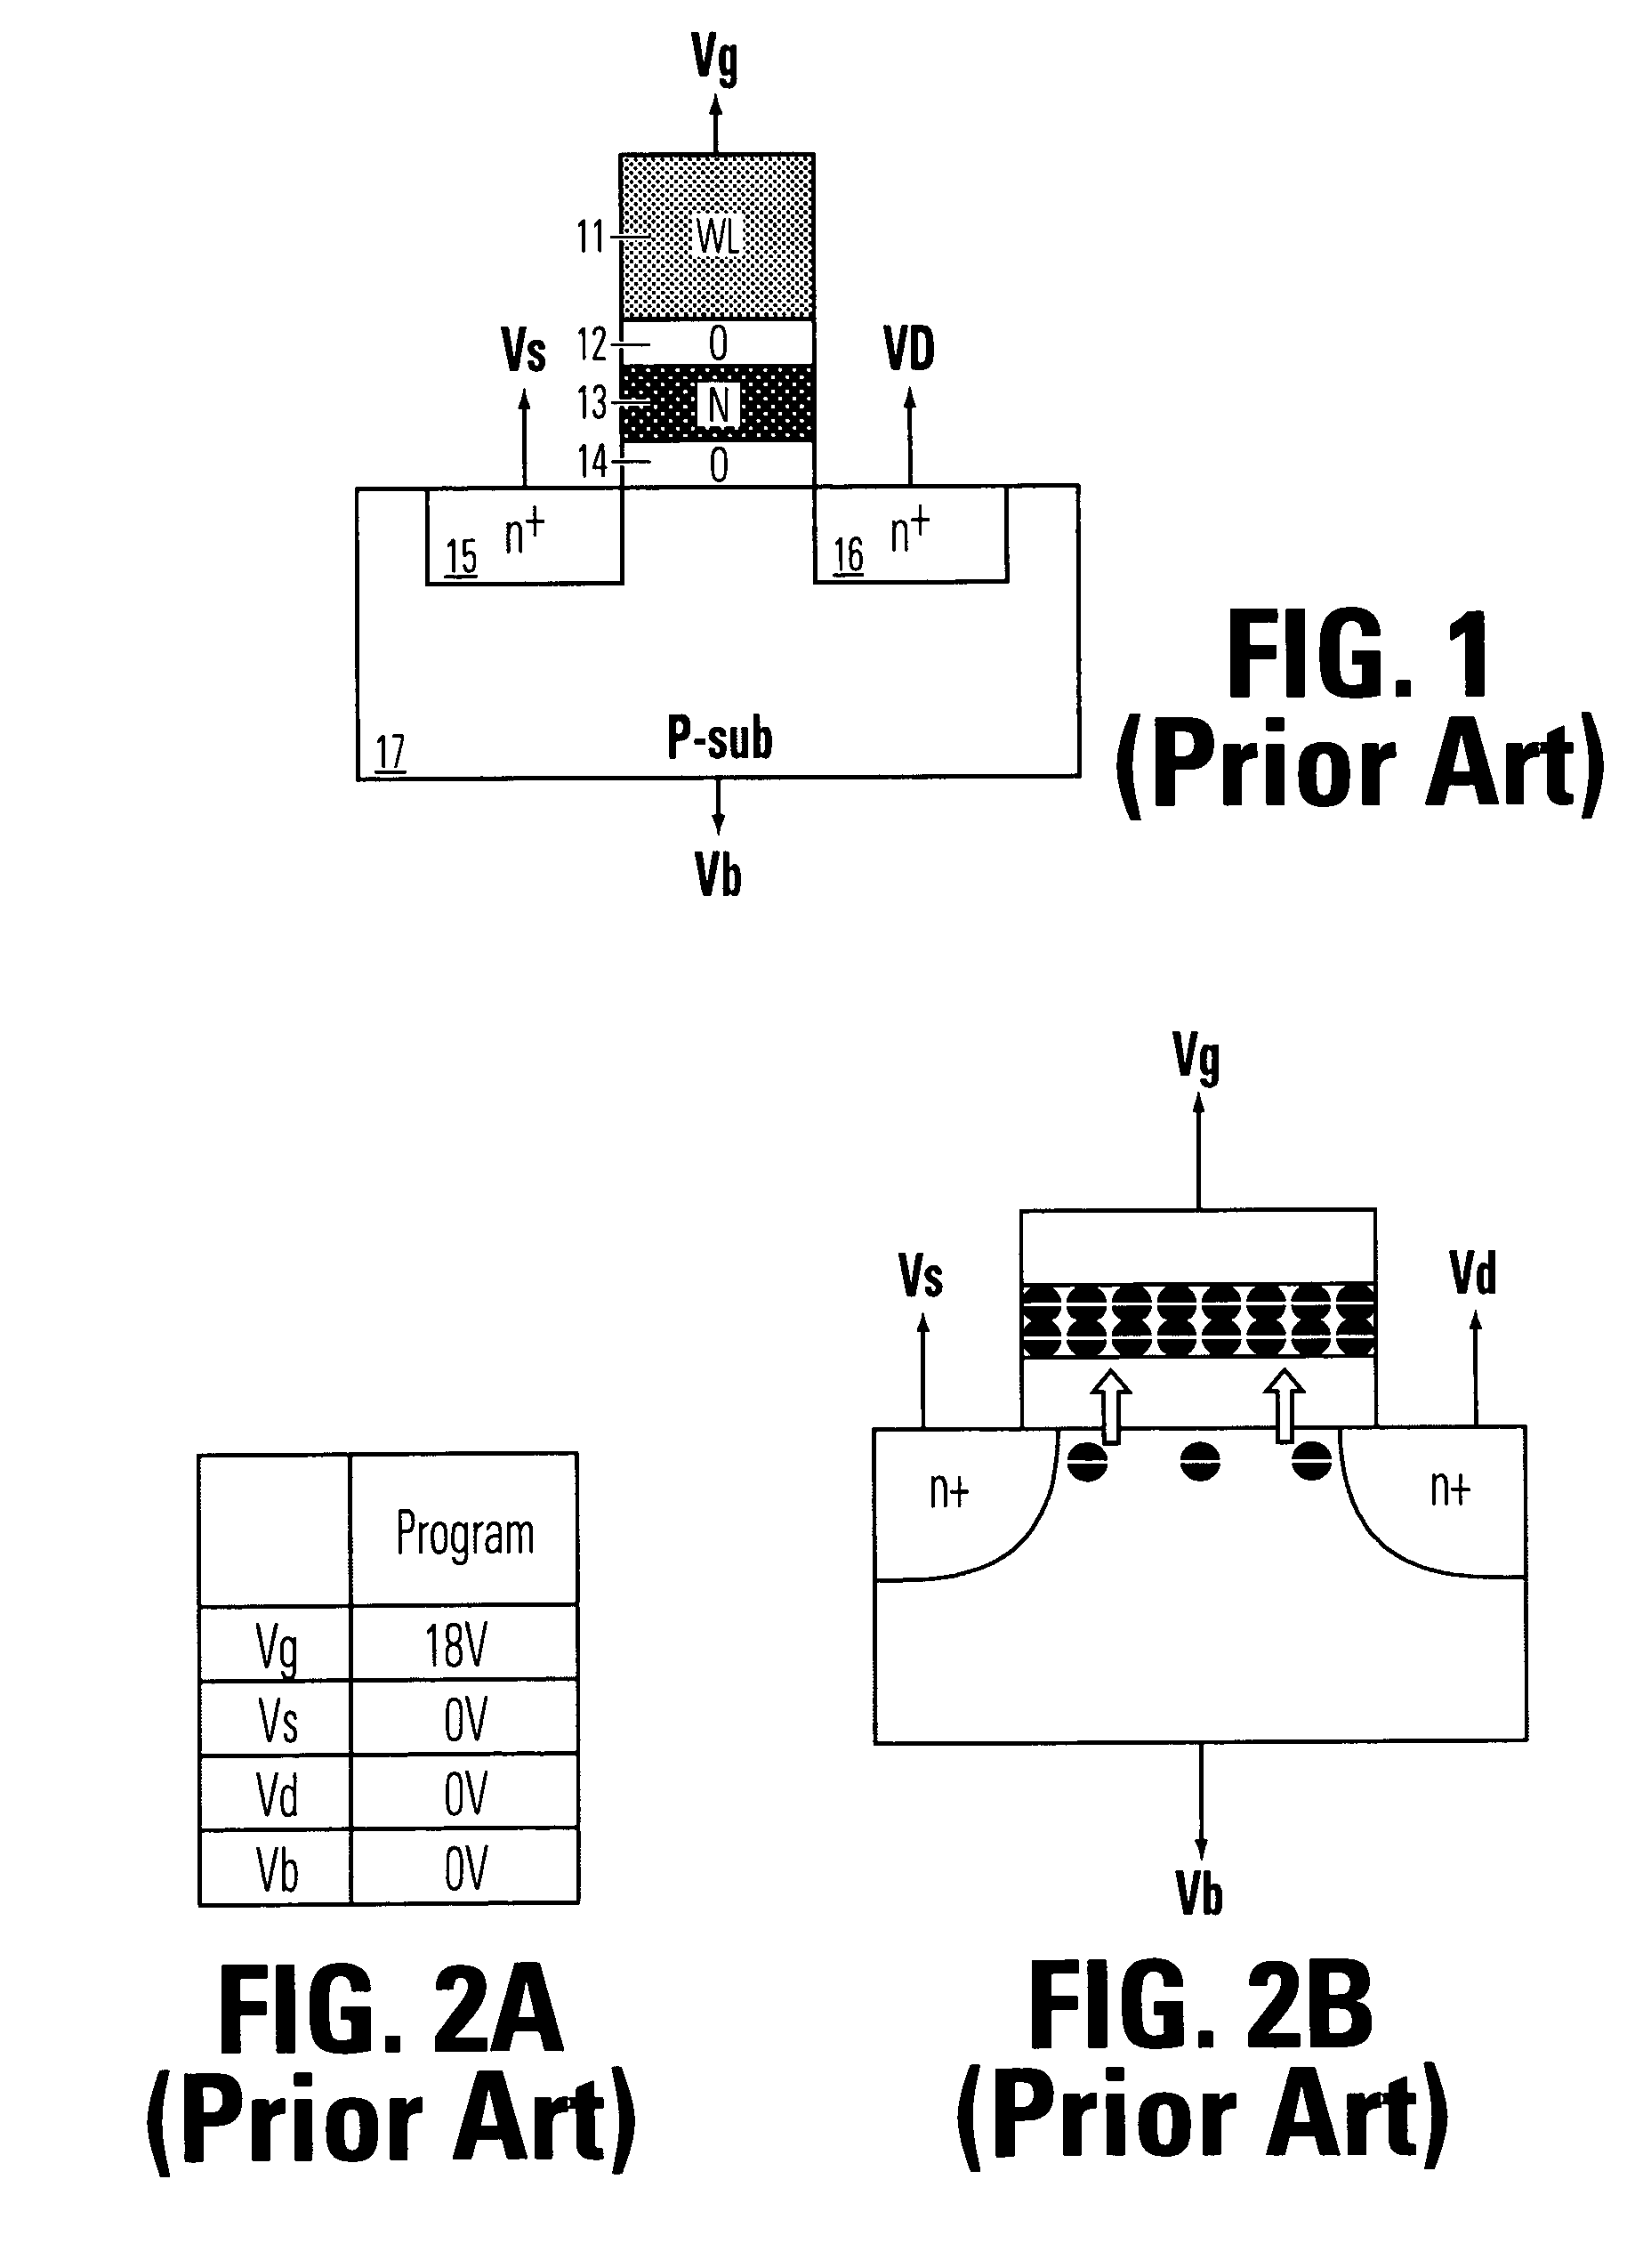 Charge trapping non-volatile memory with two trapping locations per gate, and method for operating same